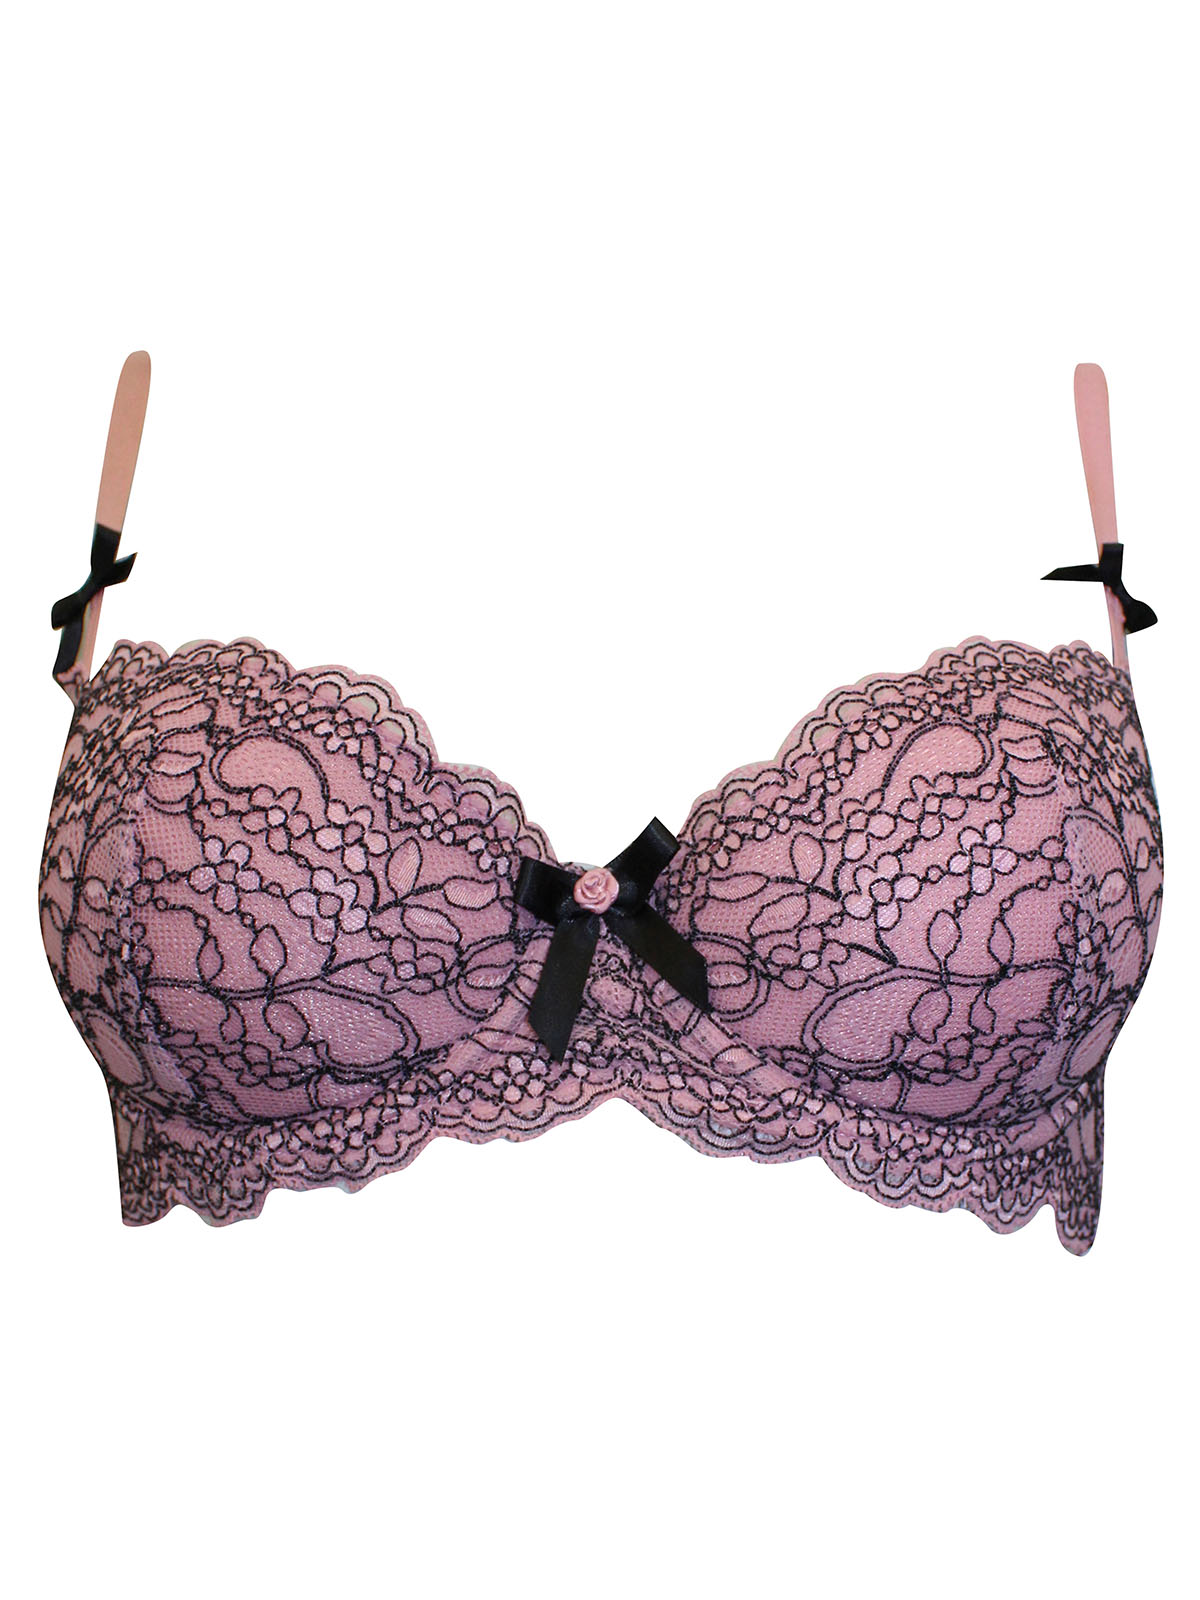 Topshop Molly lace lingerie set in pink